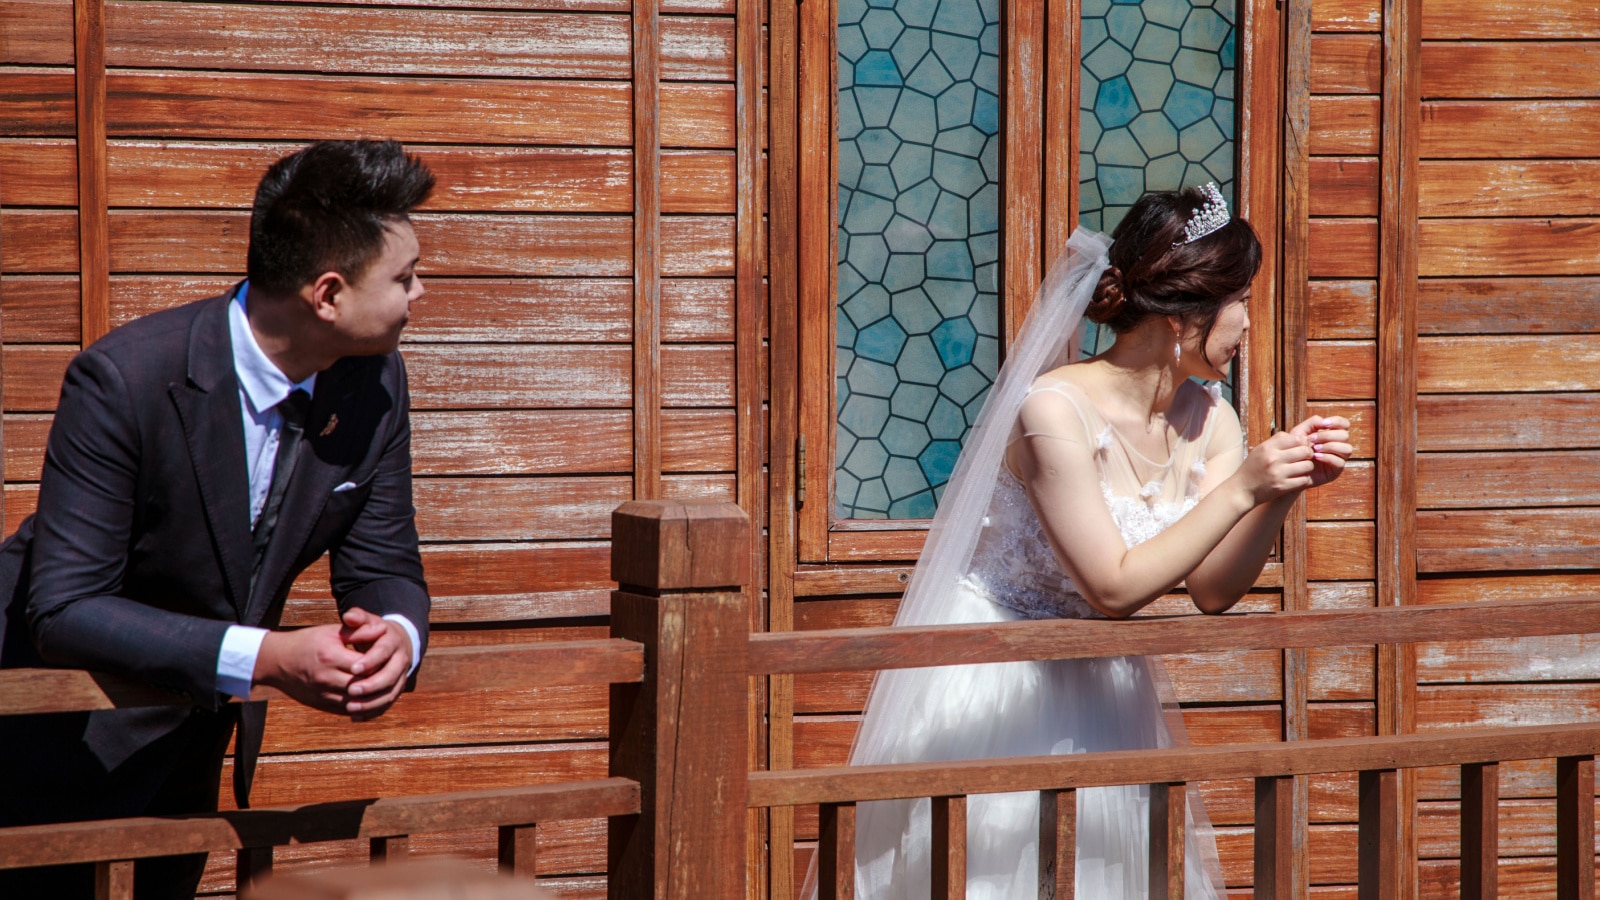 China, Hainan Island - December 1, 2018: Yalong Bay Tropical Paradise Forest Park, Wedding photo session of Chinese couples, editorial.